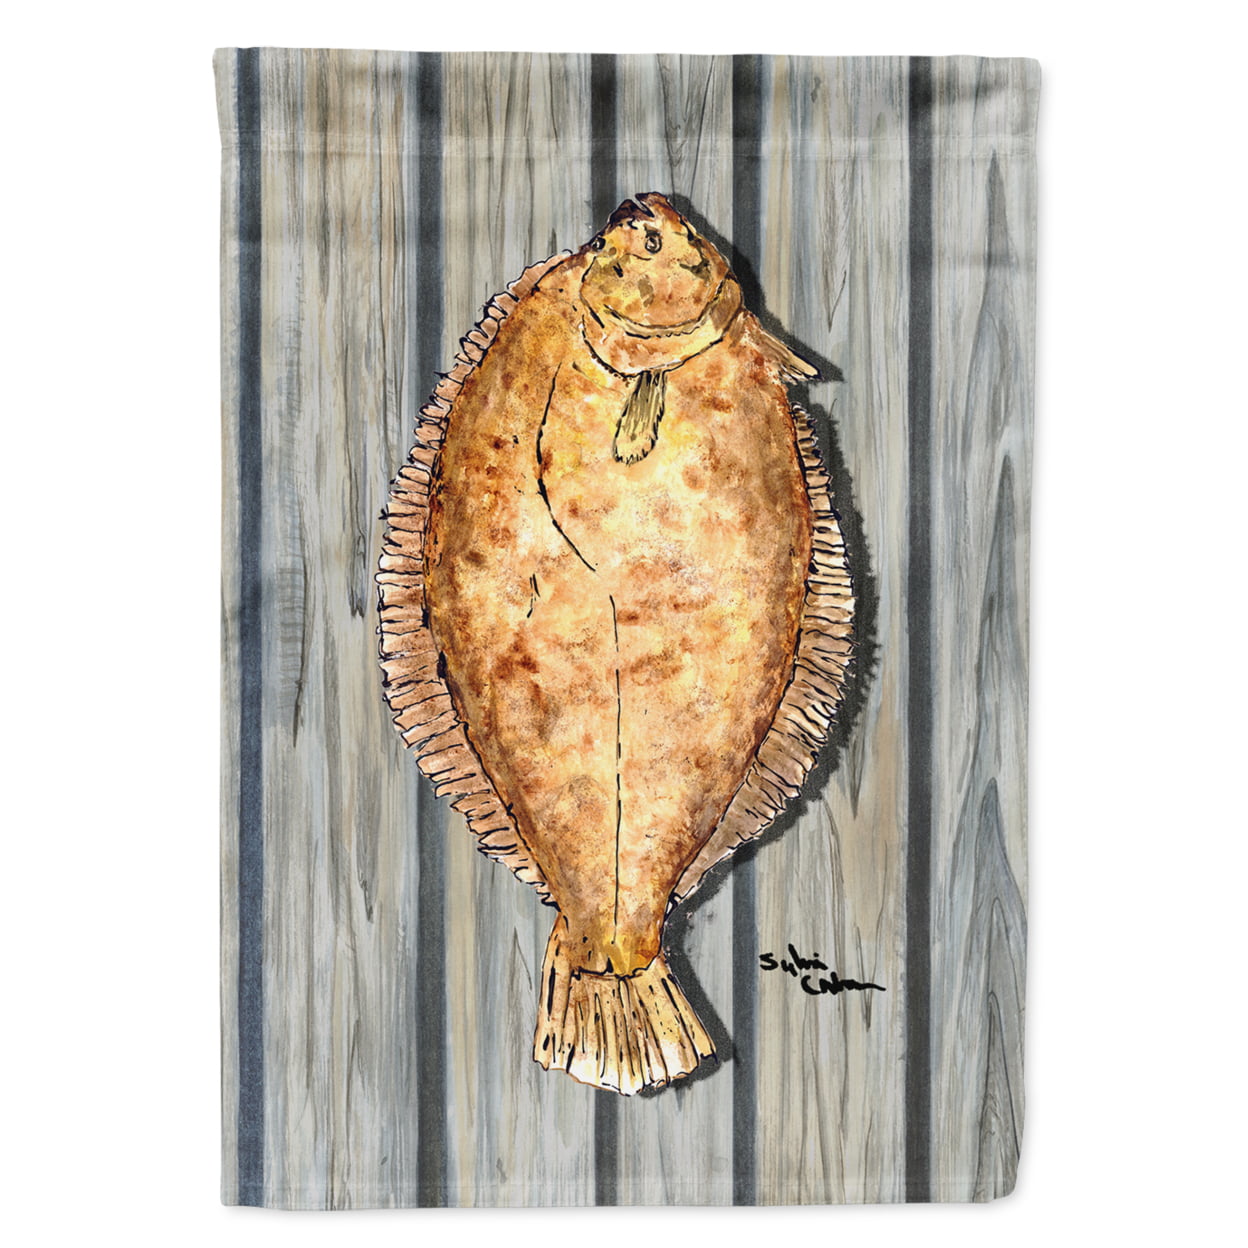 Bass Fish Jumping out of Water Fishing Garden Yard Flag